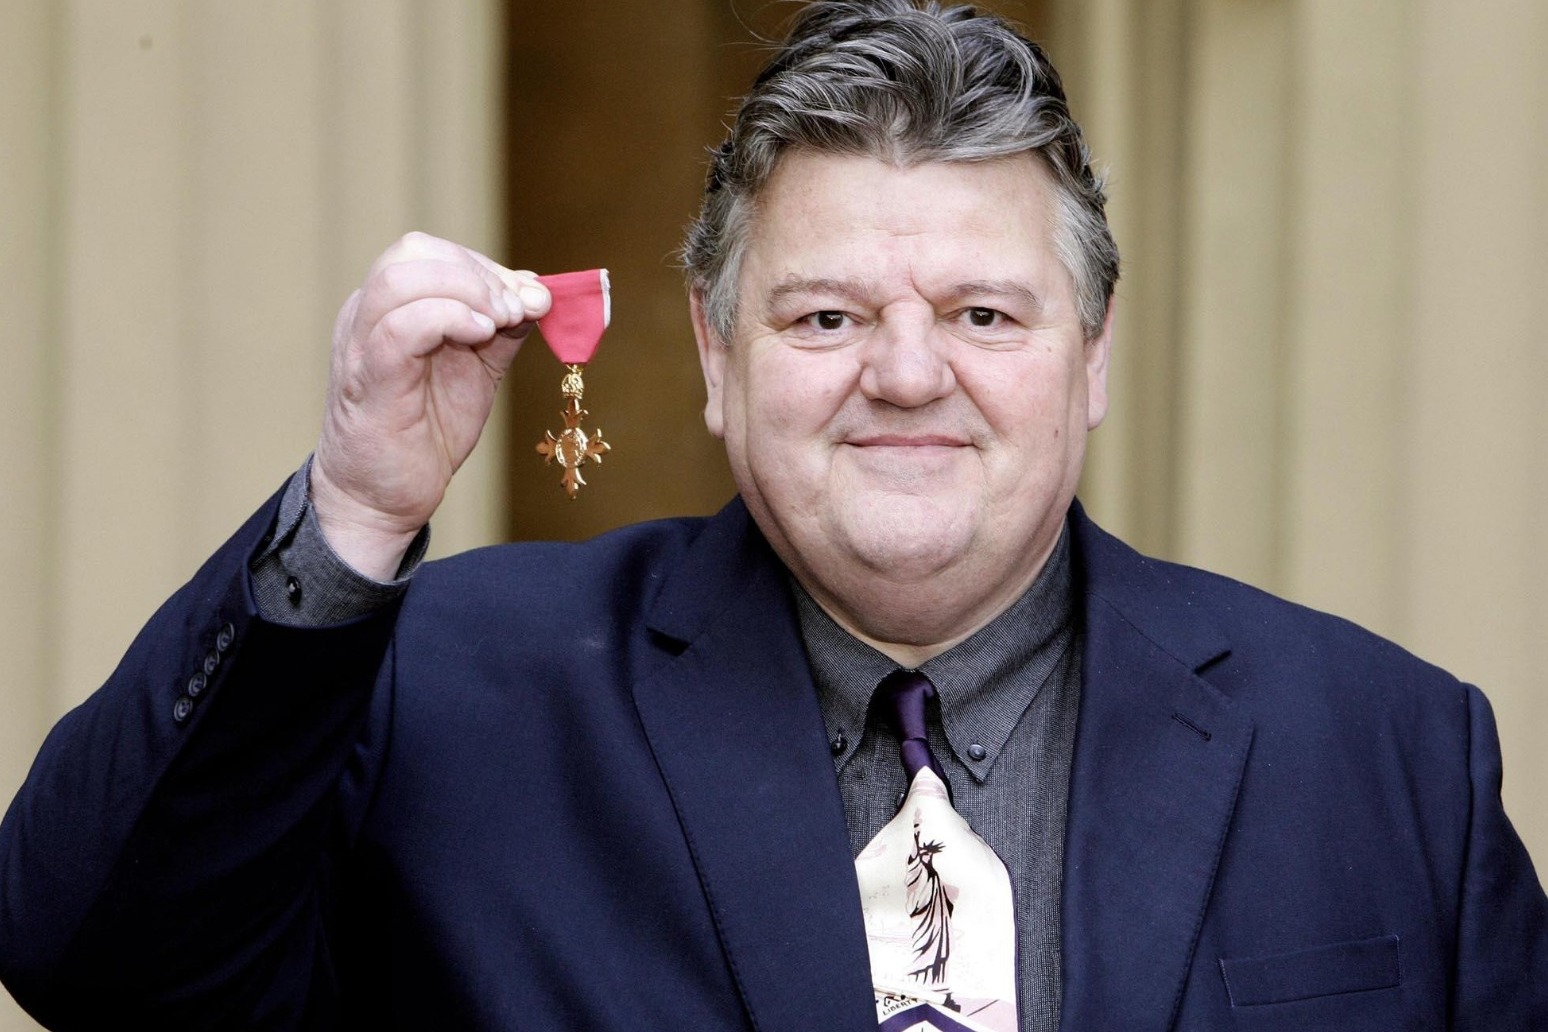 Daniel Radcliffe pays tribute to ‘incredible’ Harry Potter star Robbie Coltrane 